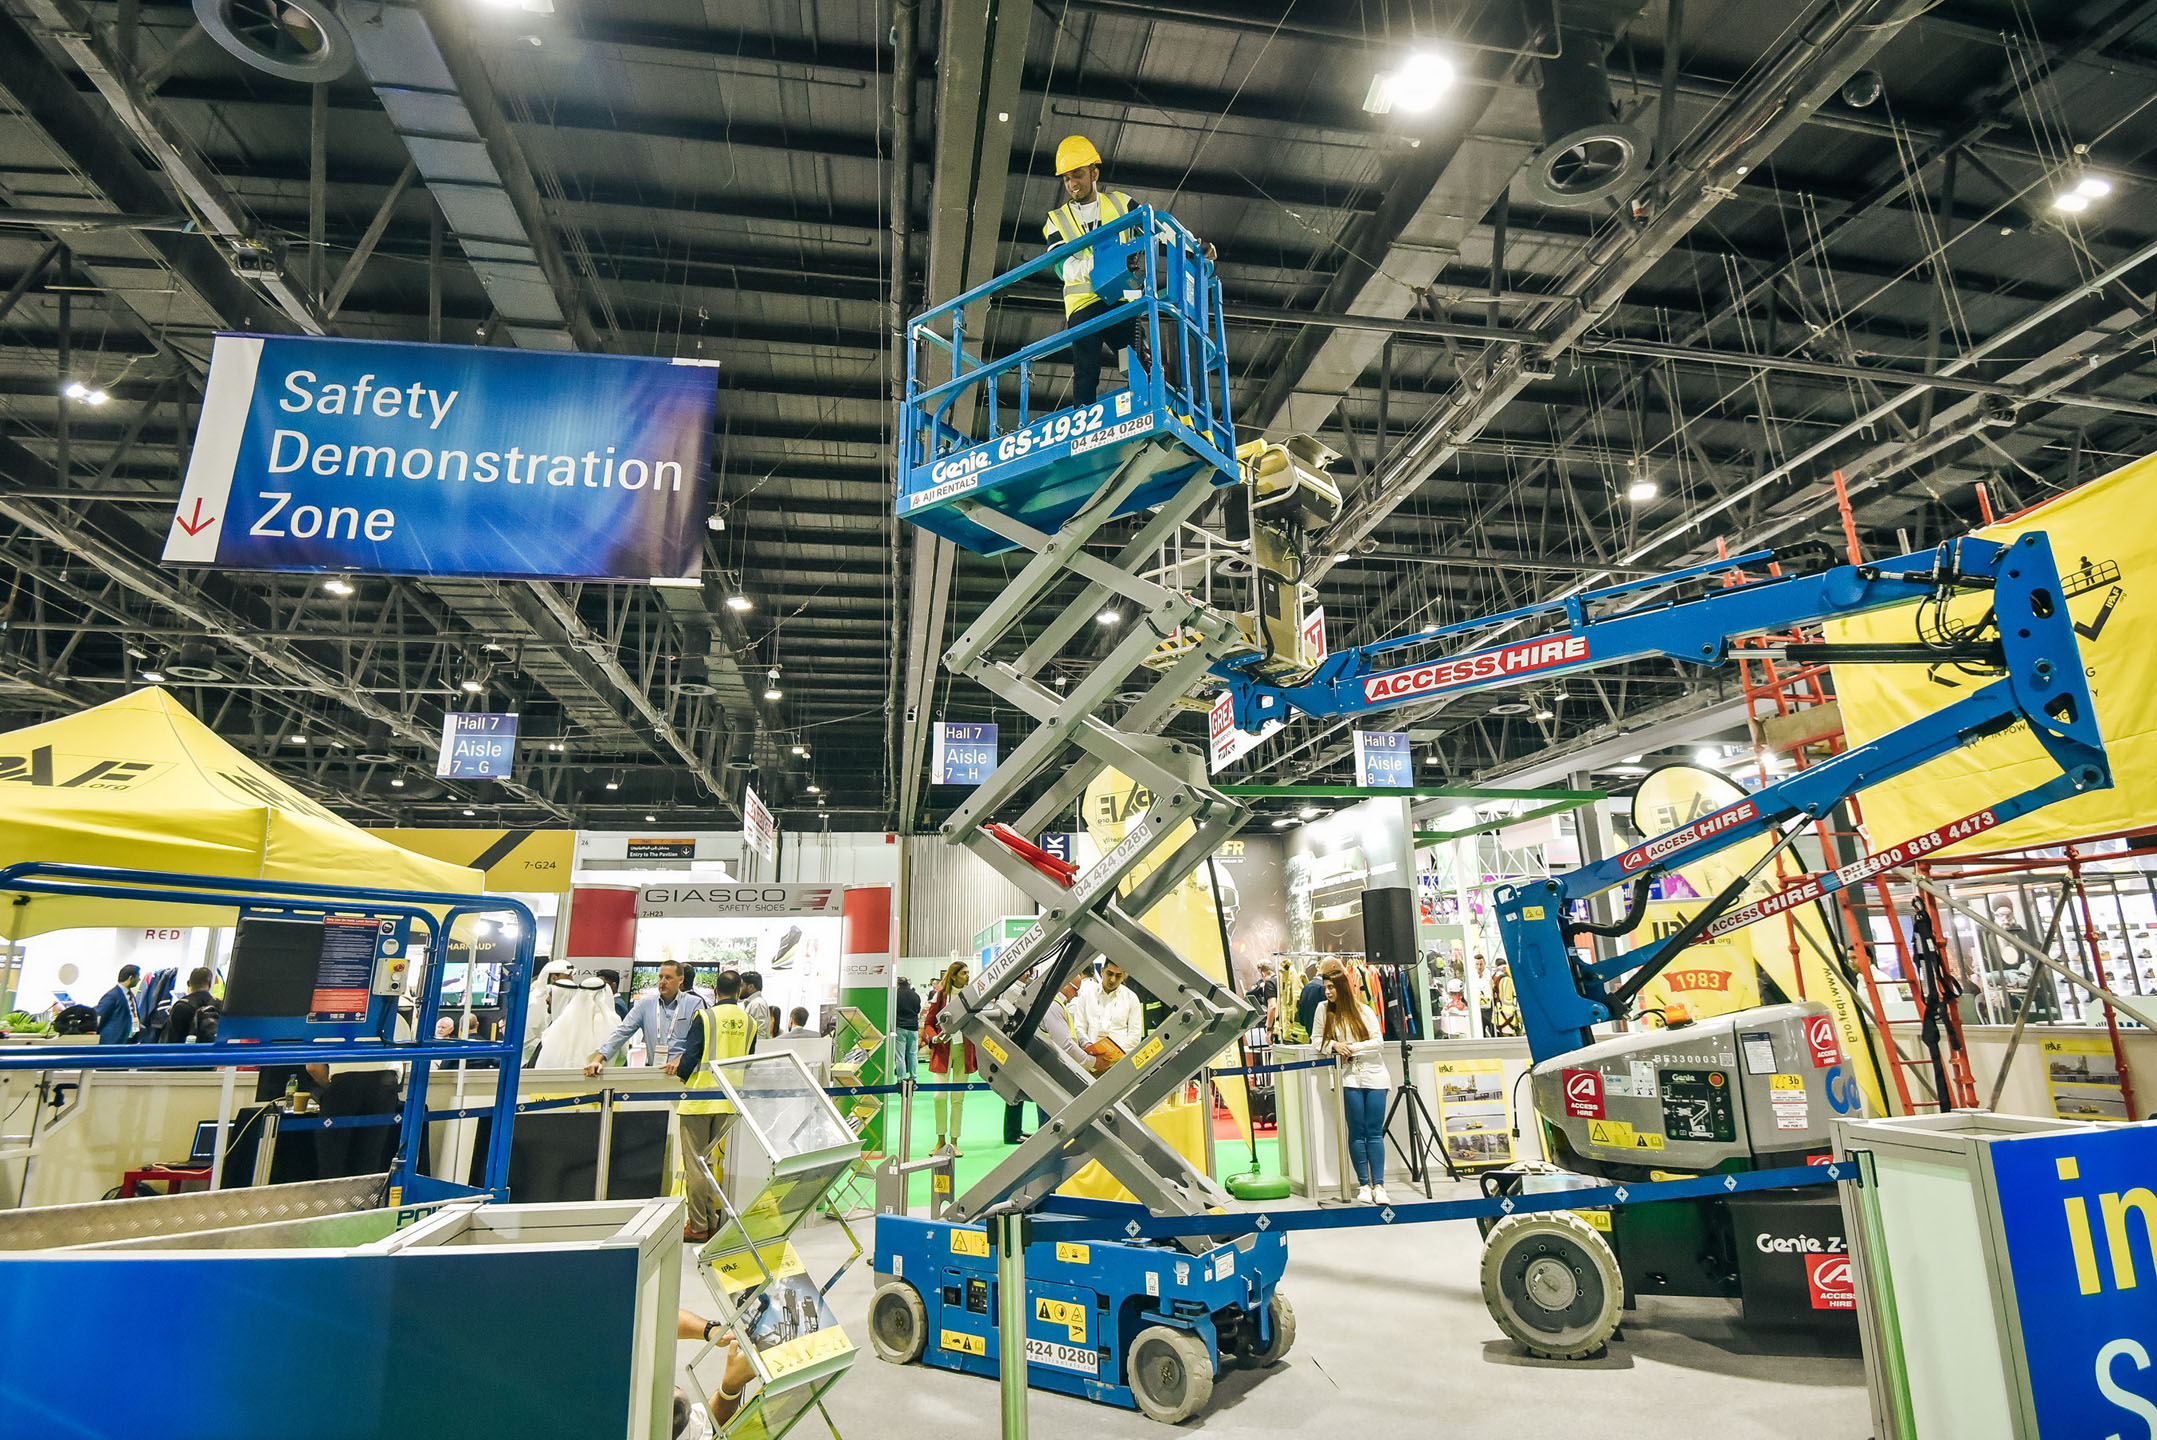 Safety Demonstration at Intersec 2020